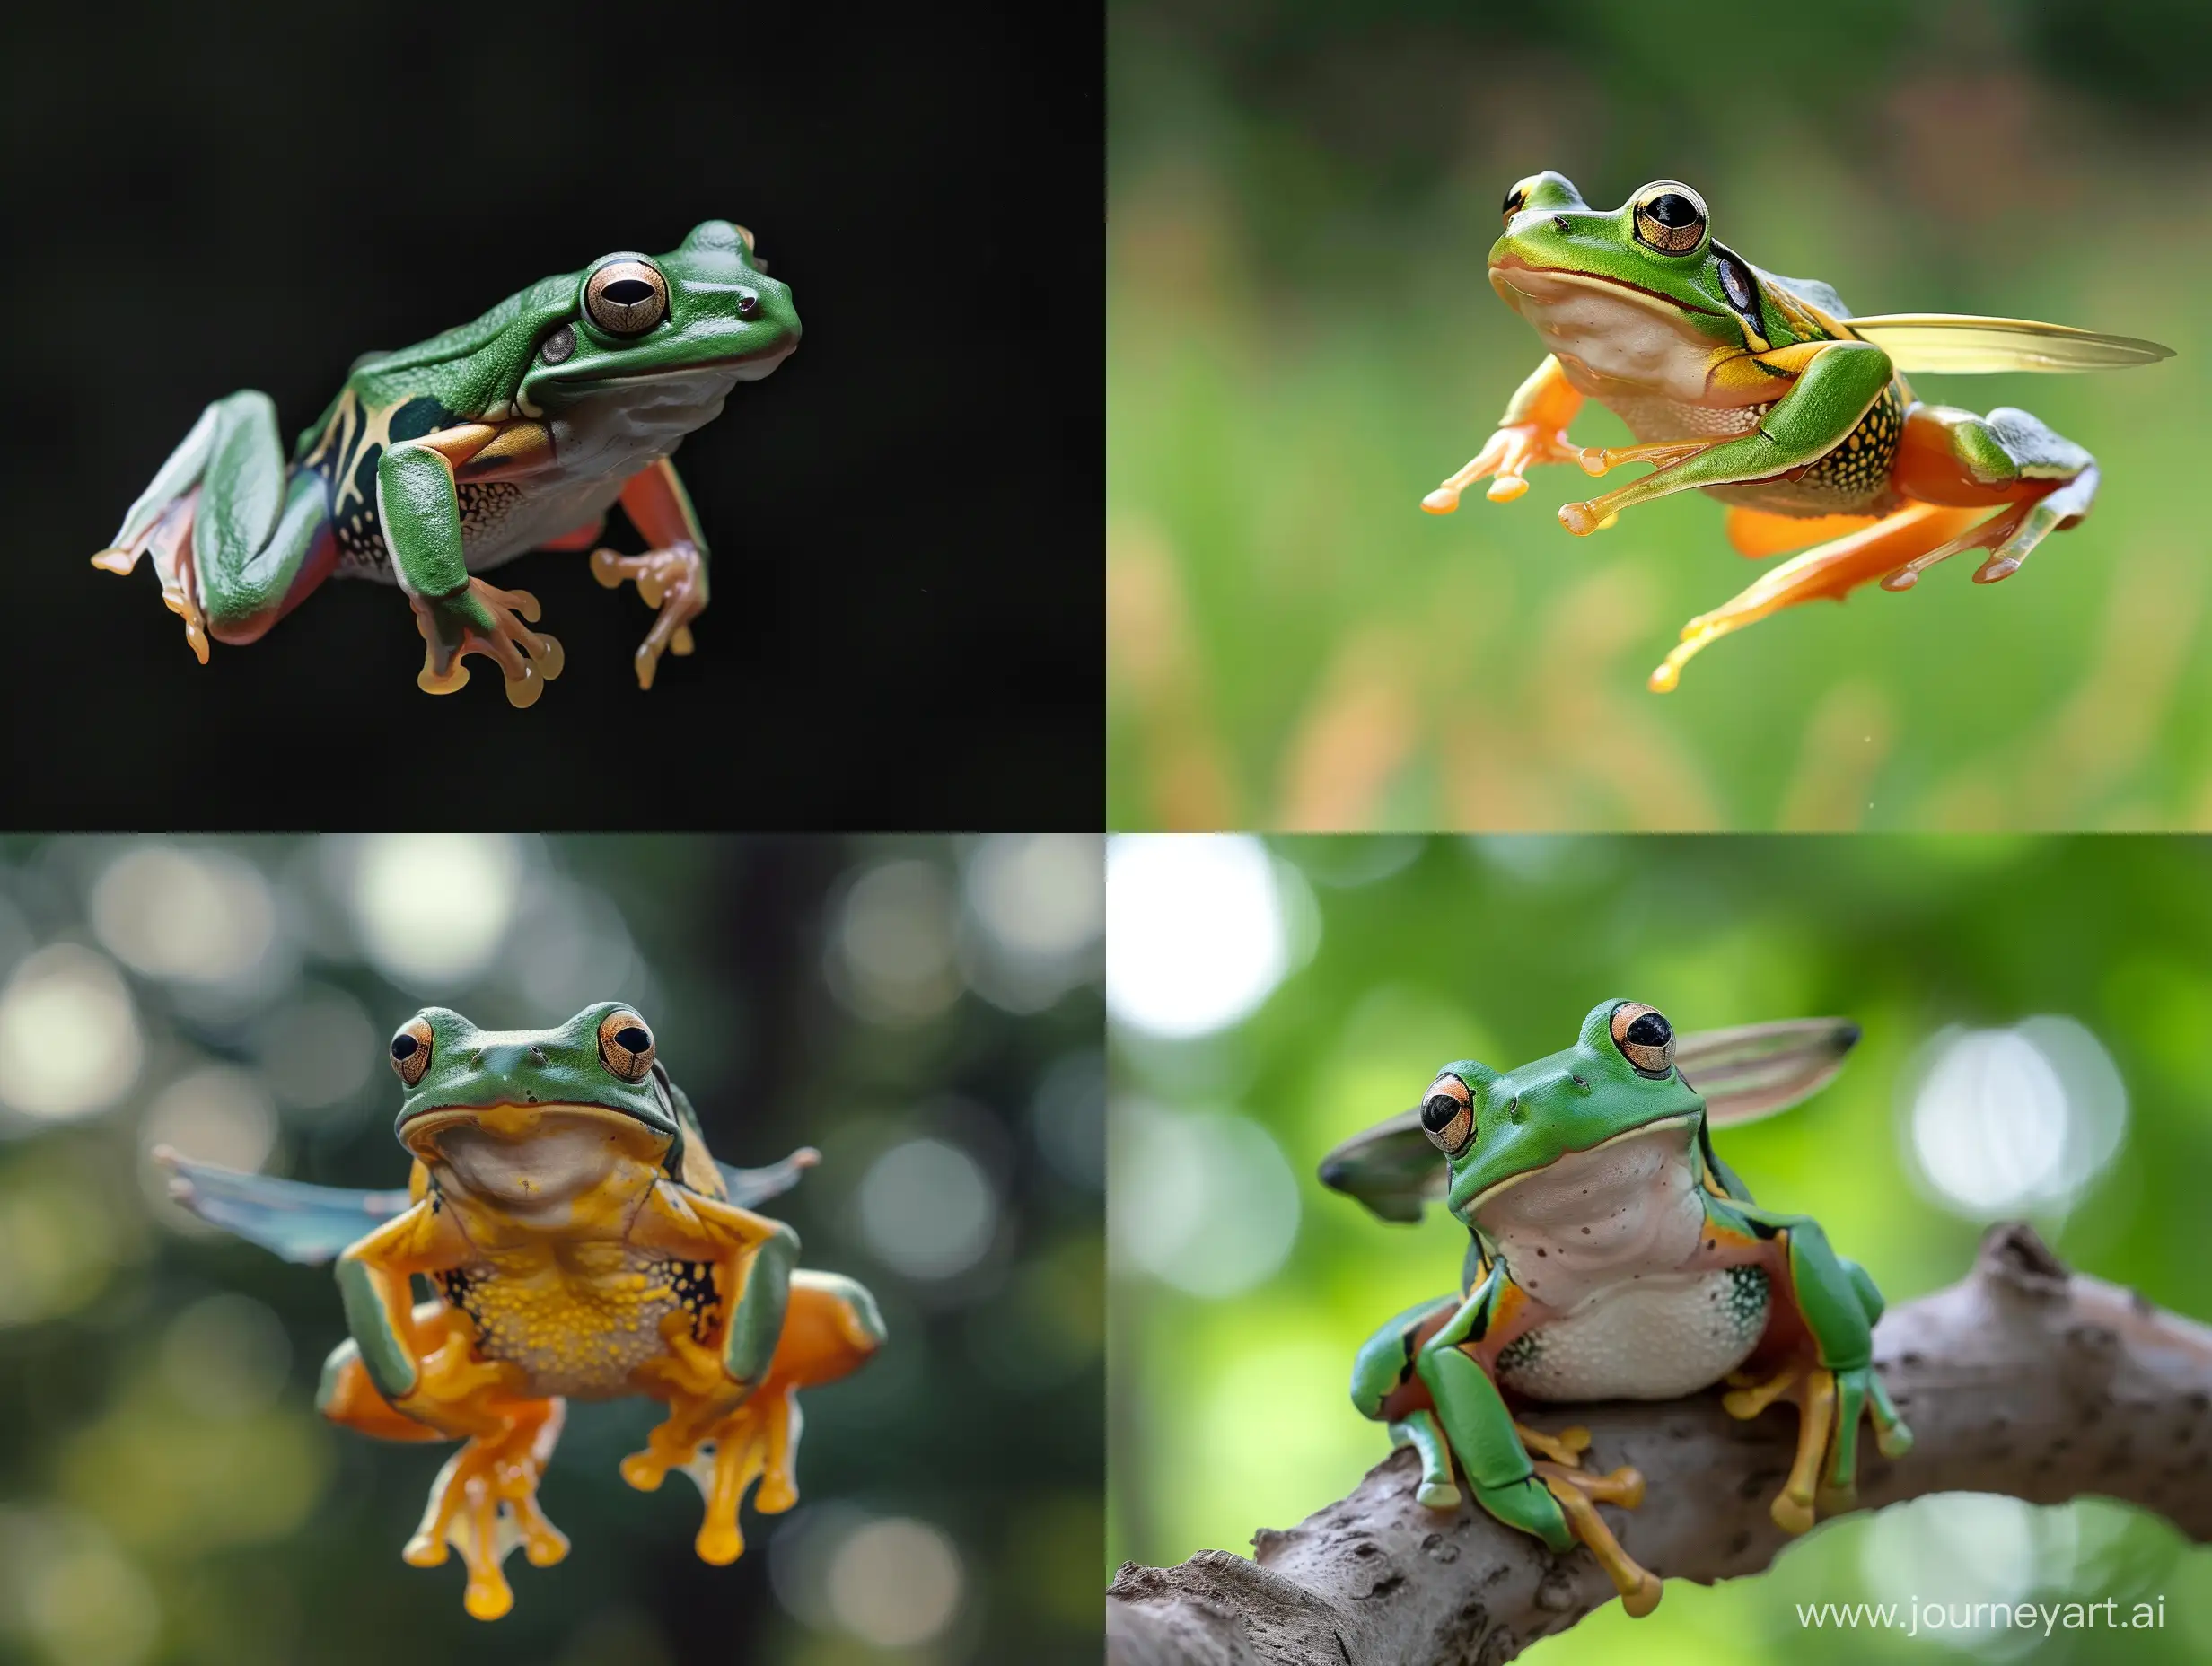 Enchanting-Flight-of-Tree-Frogs-in-a-43-Aspect-Ratio